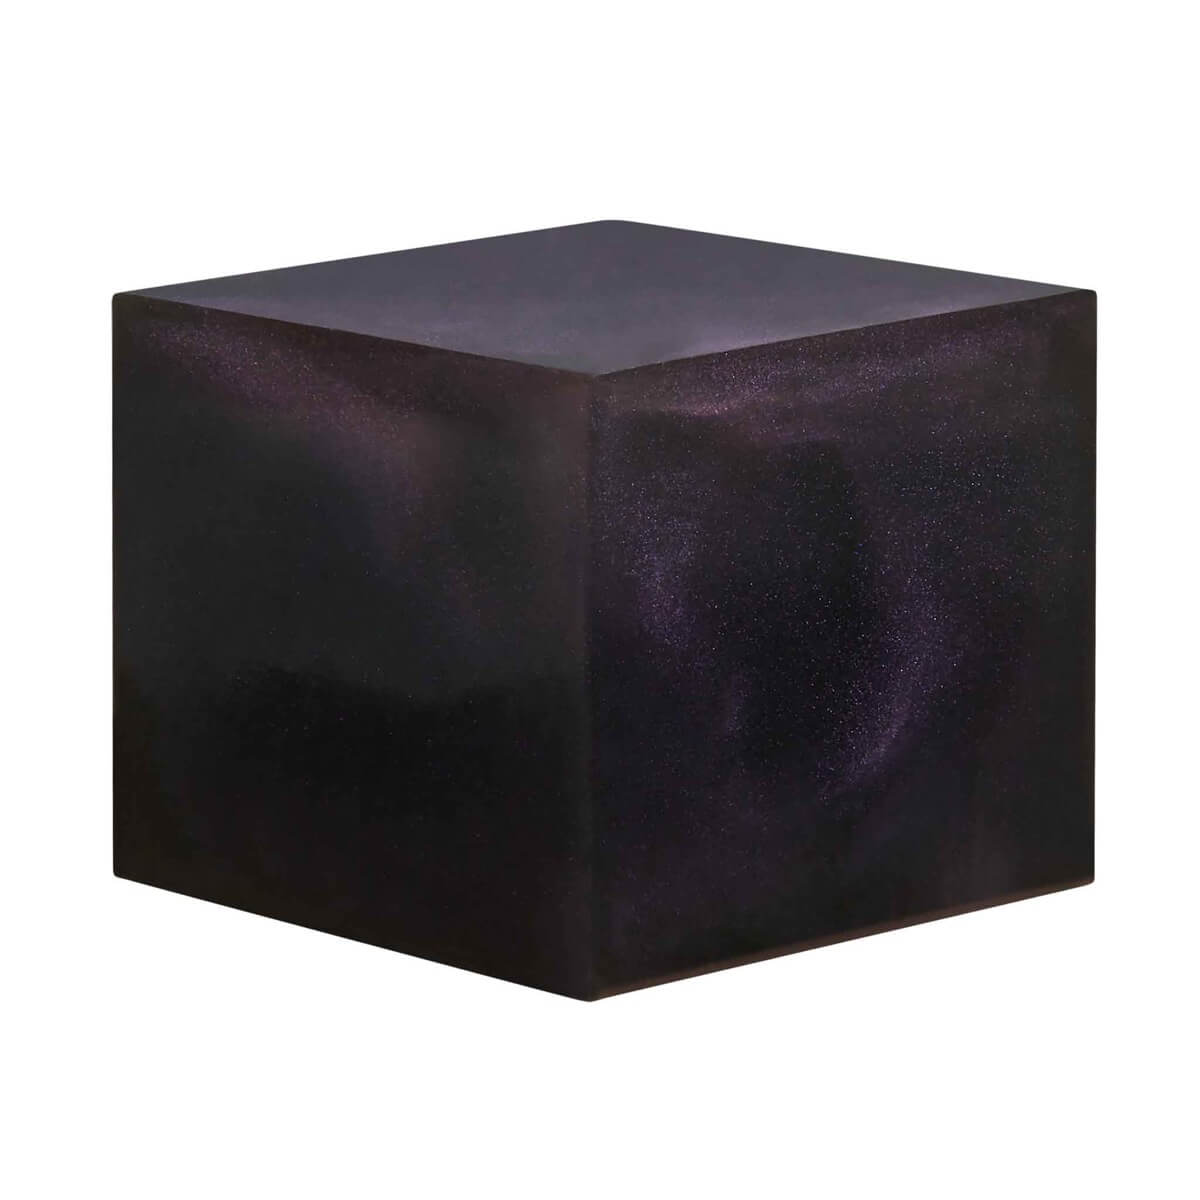 A resin cube made with the Purple Ink Mica Powder Pigment by Pigmently.